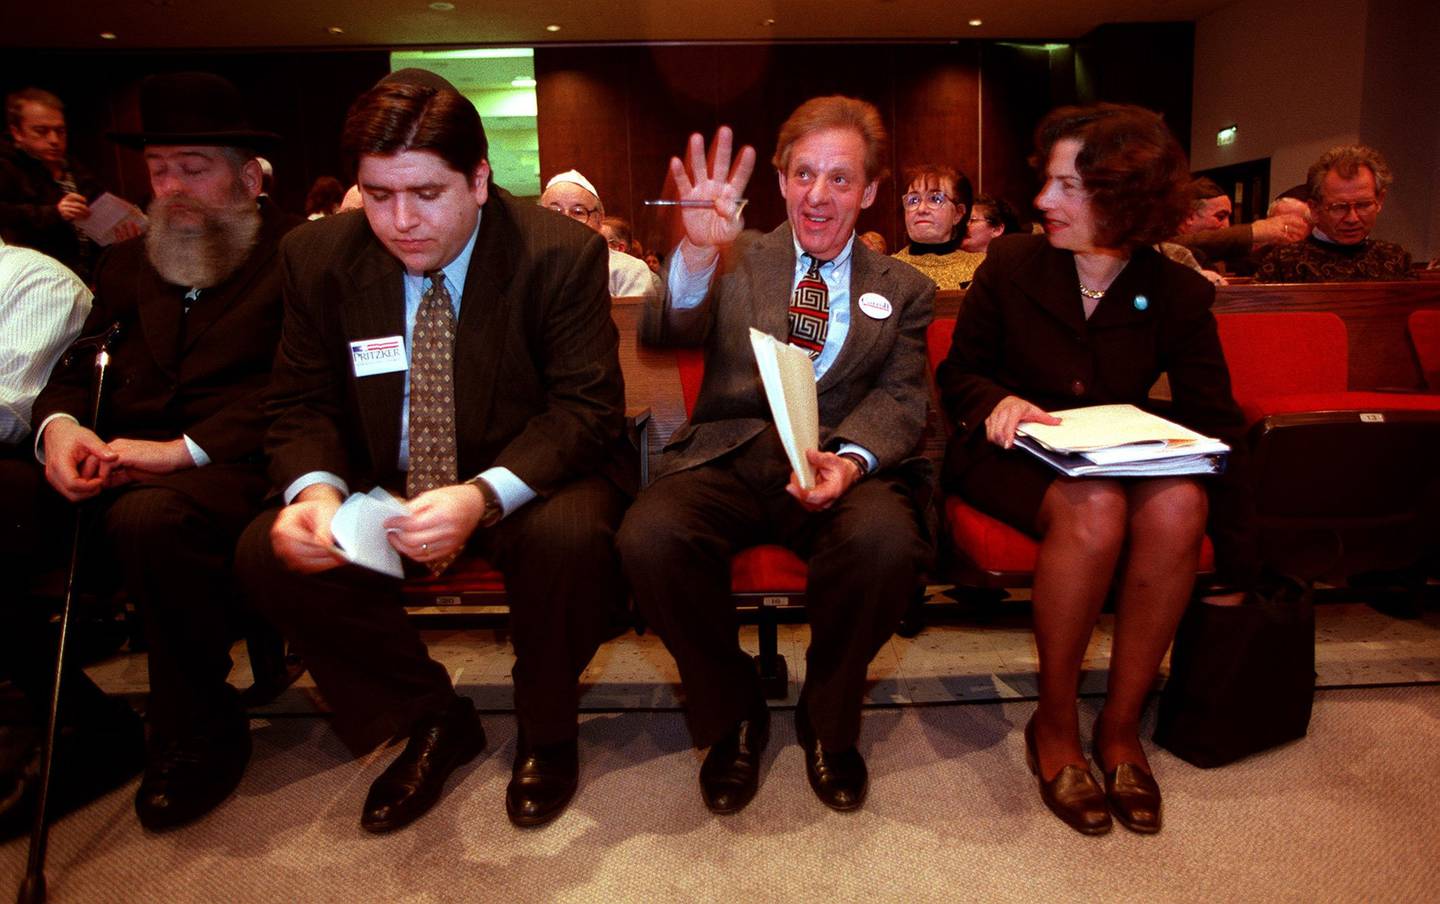 J.B. Pritzker, second from left, checks his notes in 1998 while he and Howard Carroll and Jan Schakowsky await their cue to take the stage for a debate in the Democratic campaign for the 9th Congressional District. Schakowsky won the Democratic nomination for the seat vacated by retiring U.S. Rep. Sidney Yates.